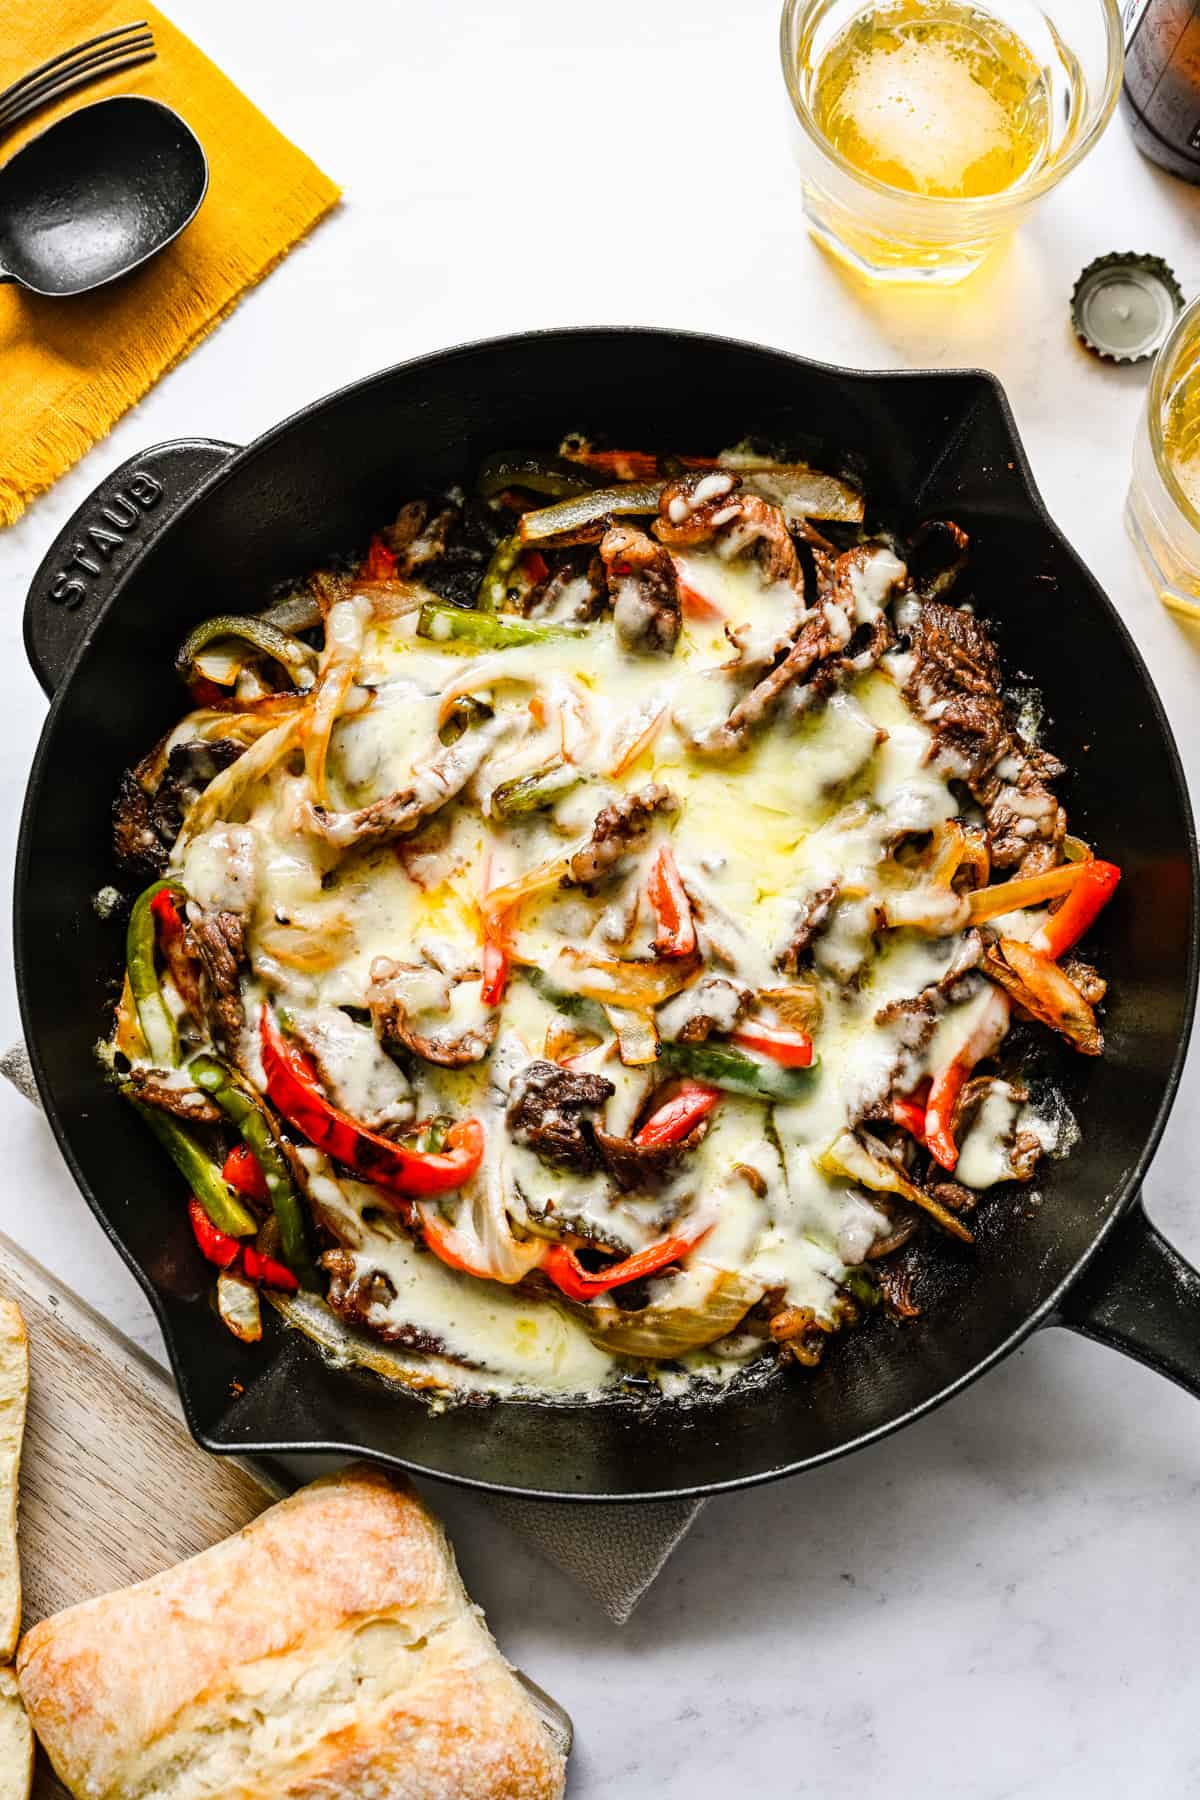 Philly cheesesteak cooked with peppers and onions in a skillet.